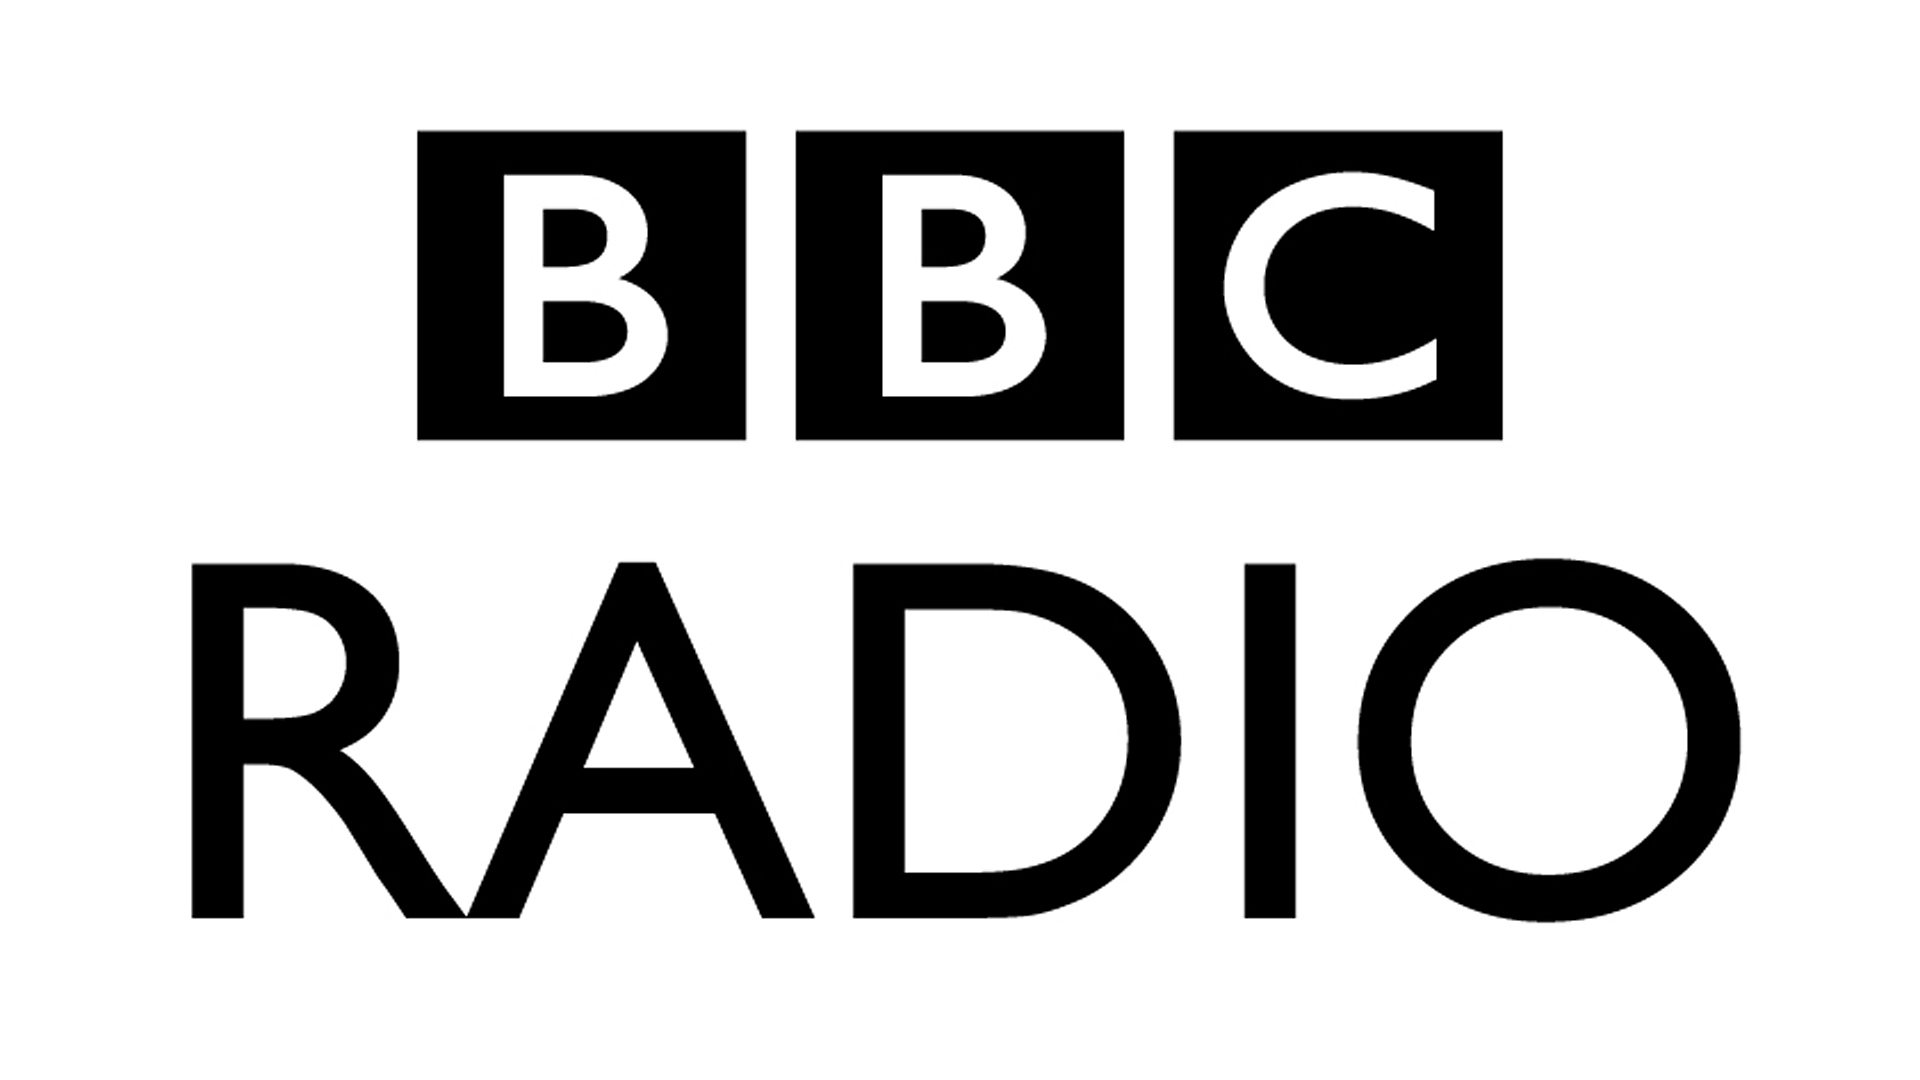 BBC Radio - BBC Radio Contacts & Information - Contacts and Information